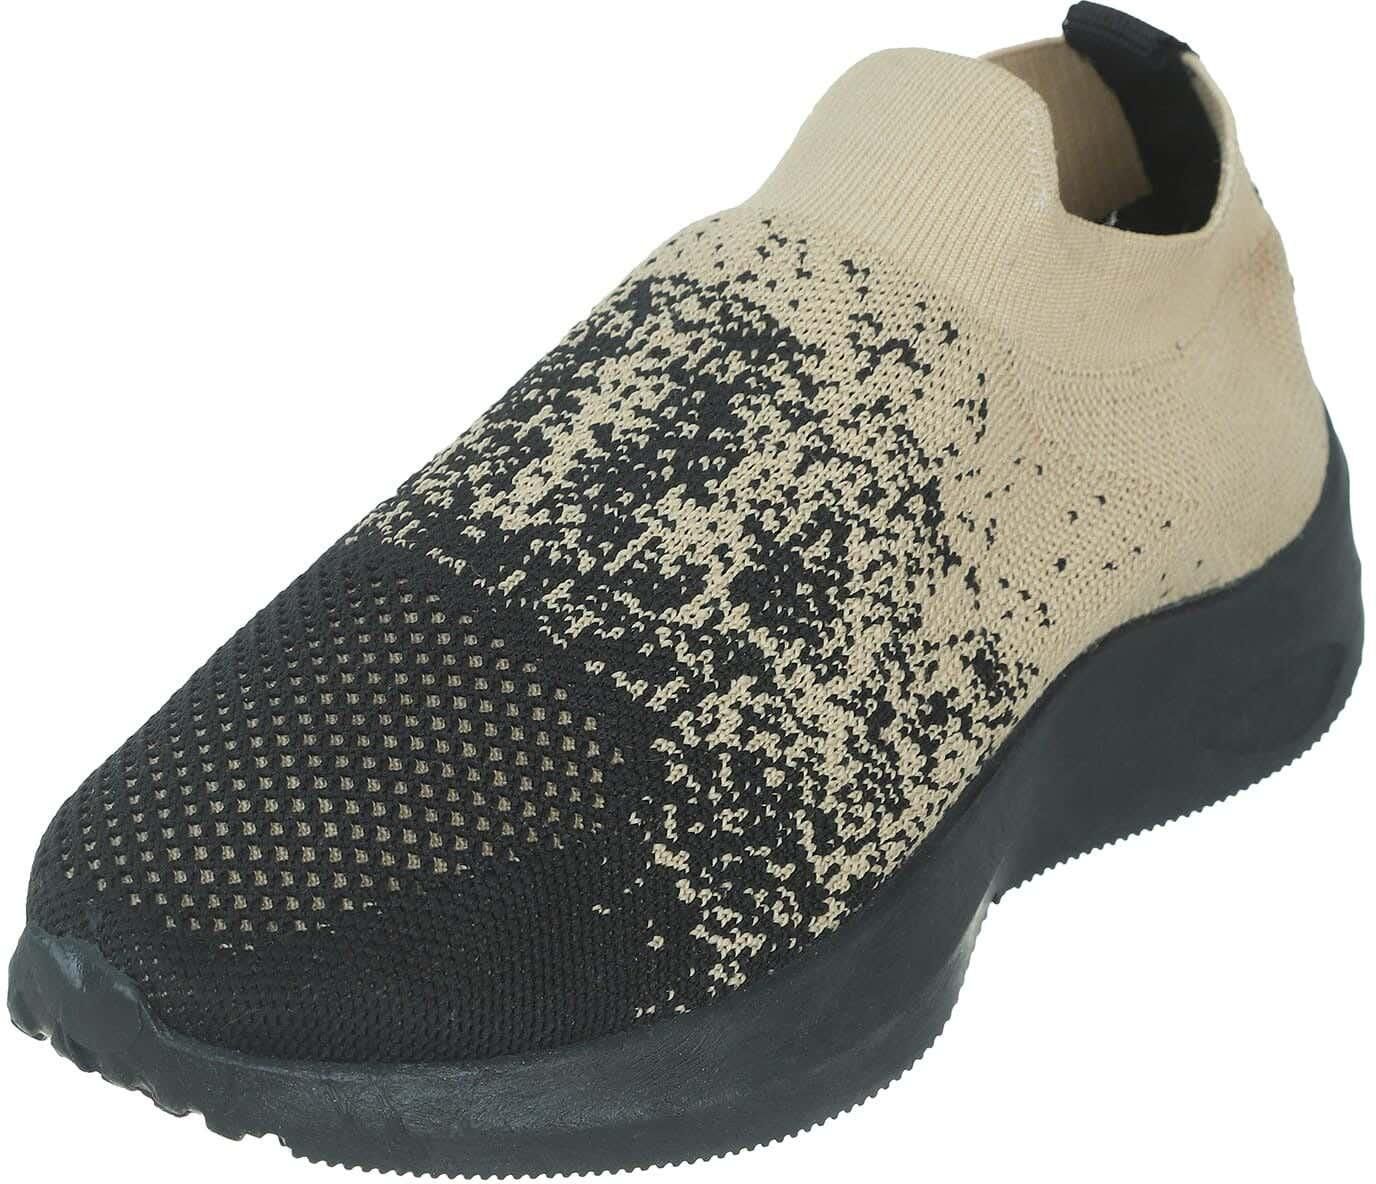 Get Asia Fabric Sneakers Shoes For Men, 44 Eu - Beige Black with best offers | Raneen.com